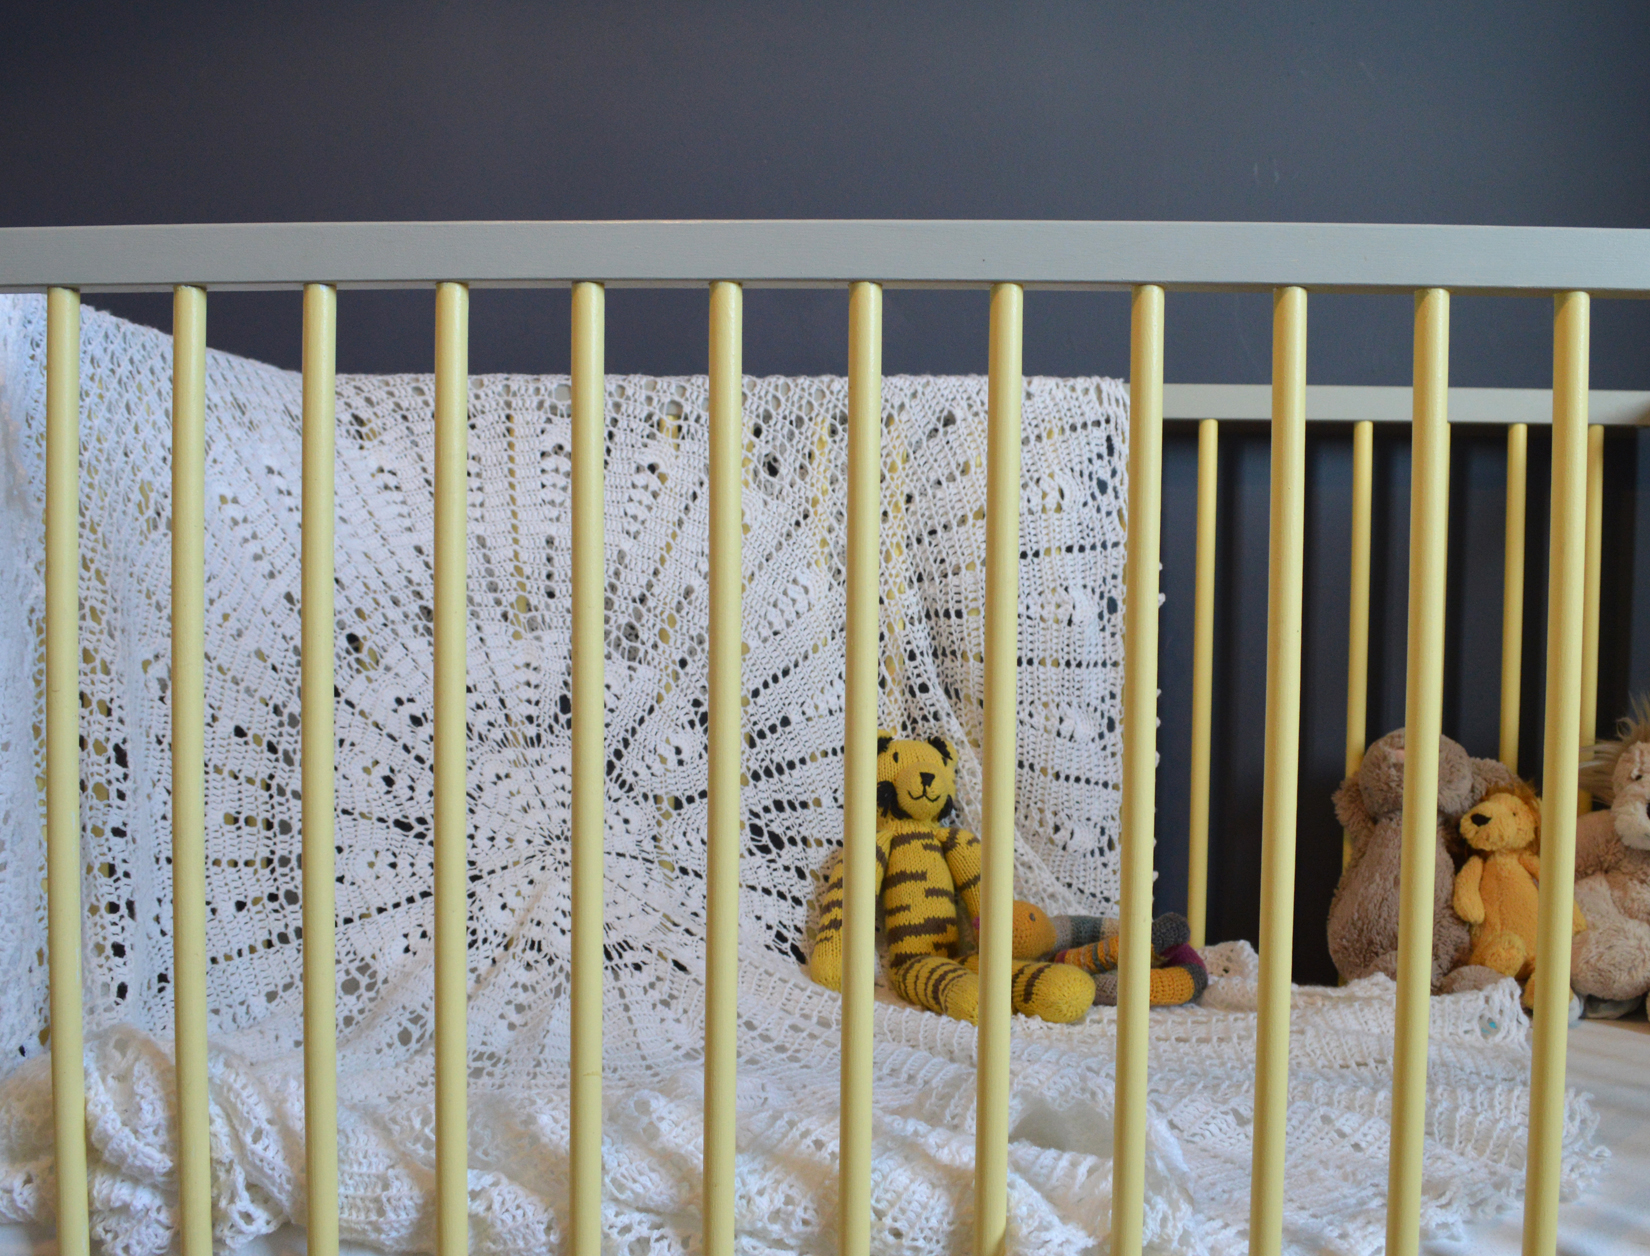 The Ikea cot is painted in Farrow &amp; Ball's Day Room Yellow and Manor House Gray